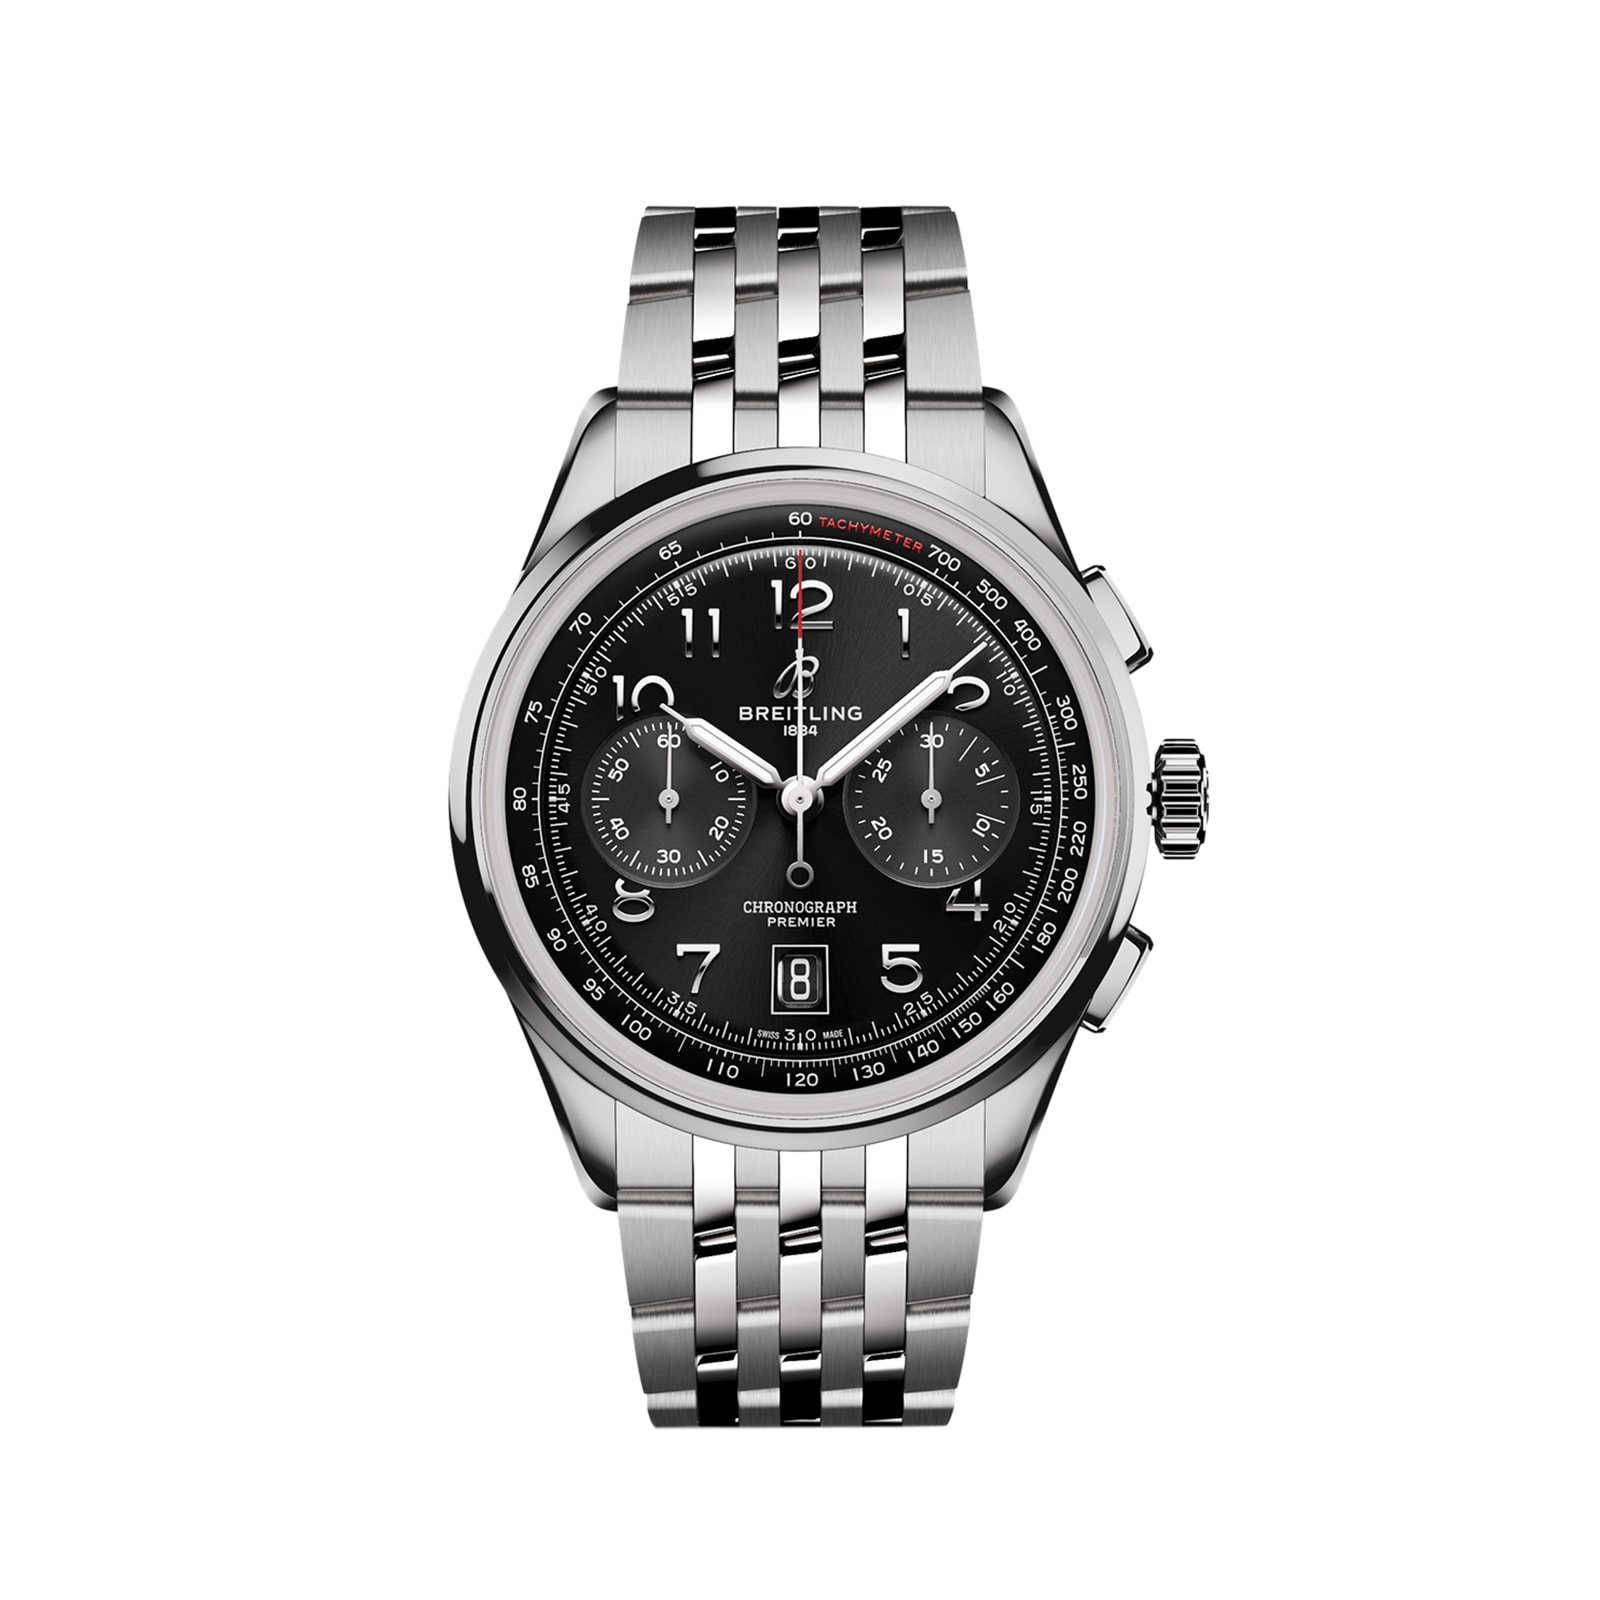 Breitling Premier B01 Chronograph 42mm Mens Watch Black Stainless Steel ...